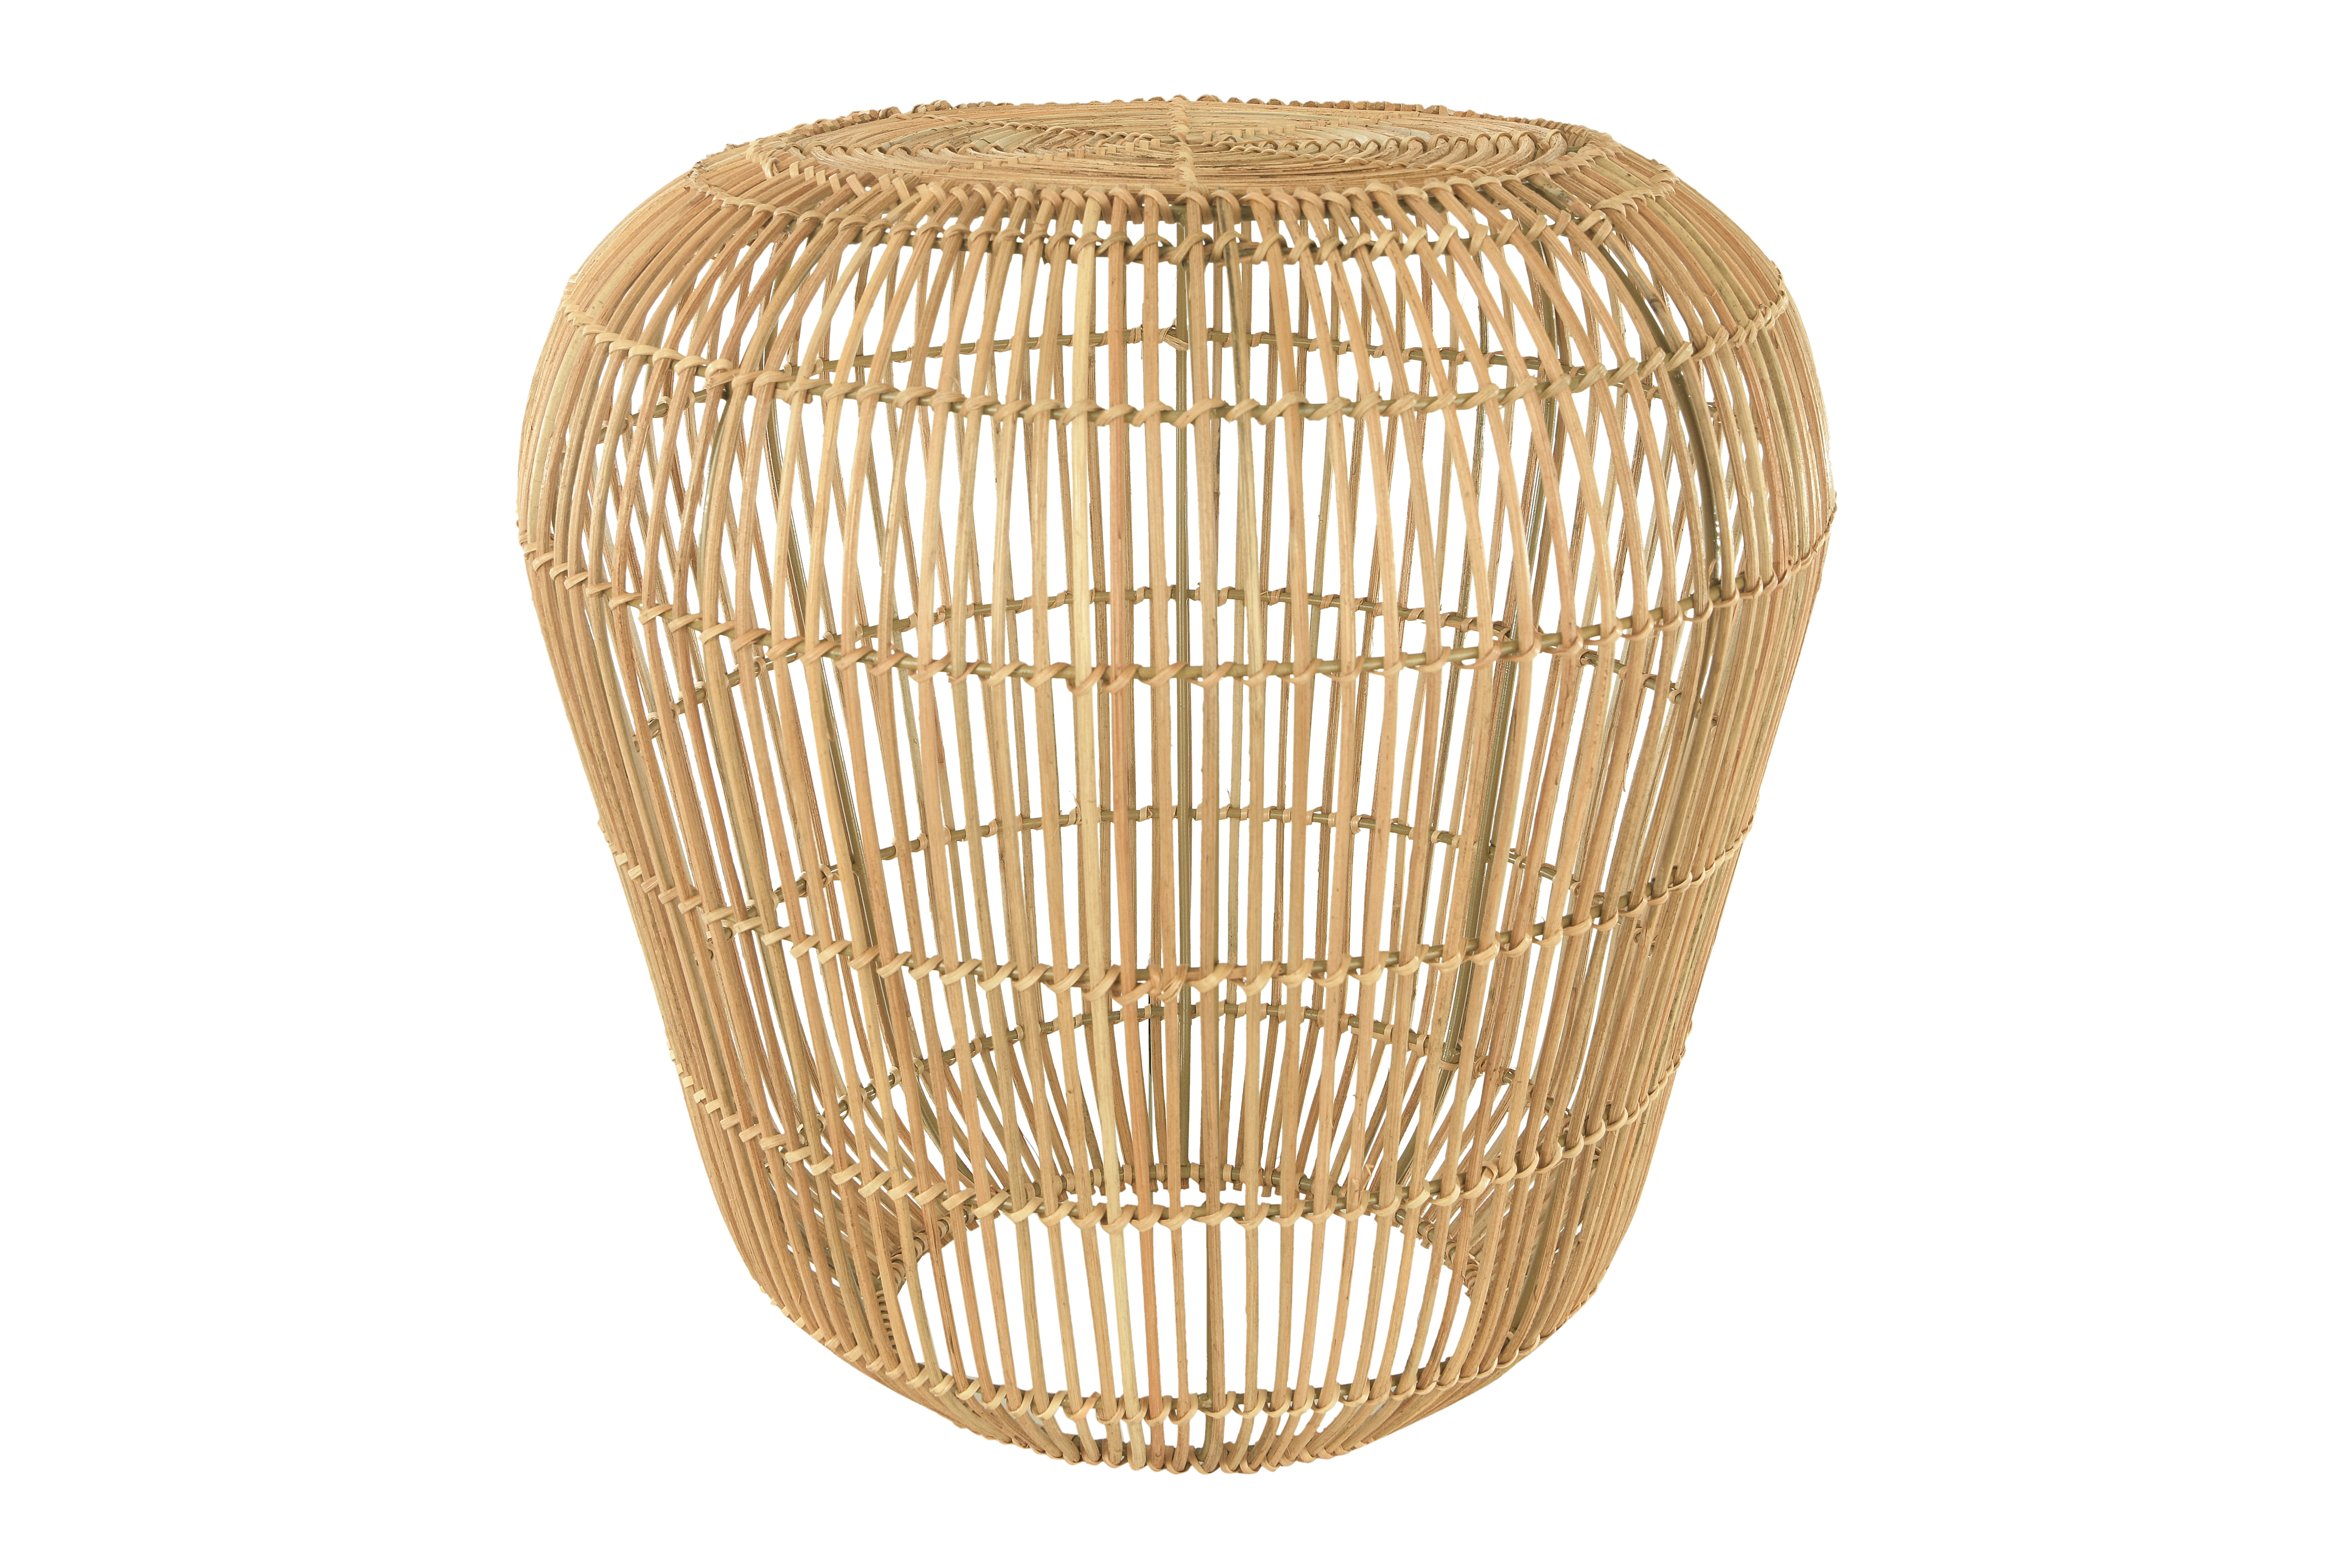 Handwoven Rattan Accent Table with Metal Frame - Moss & Wilder